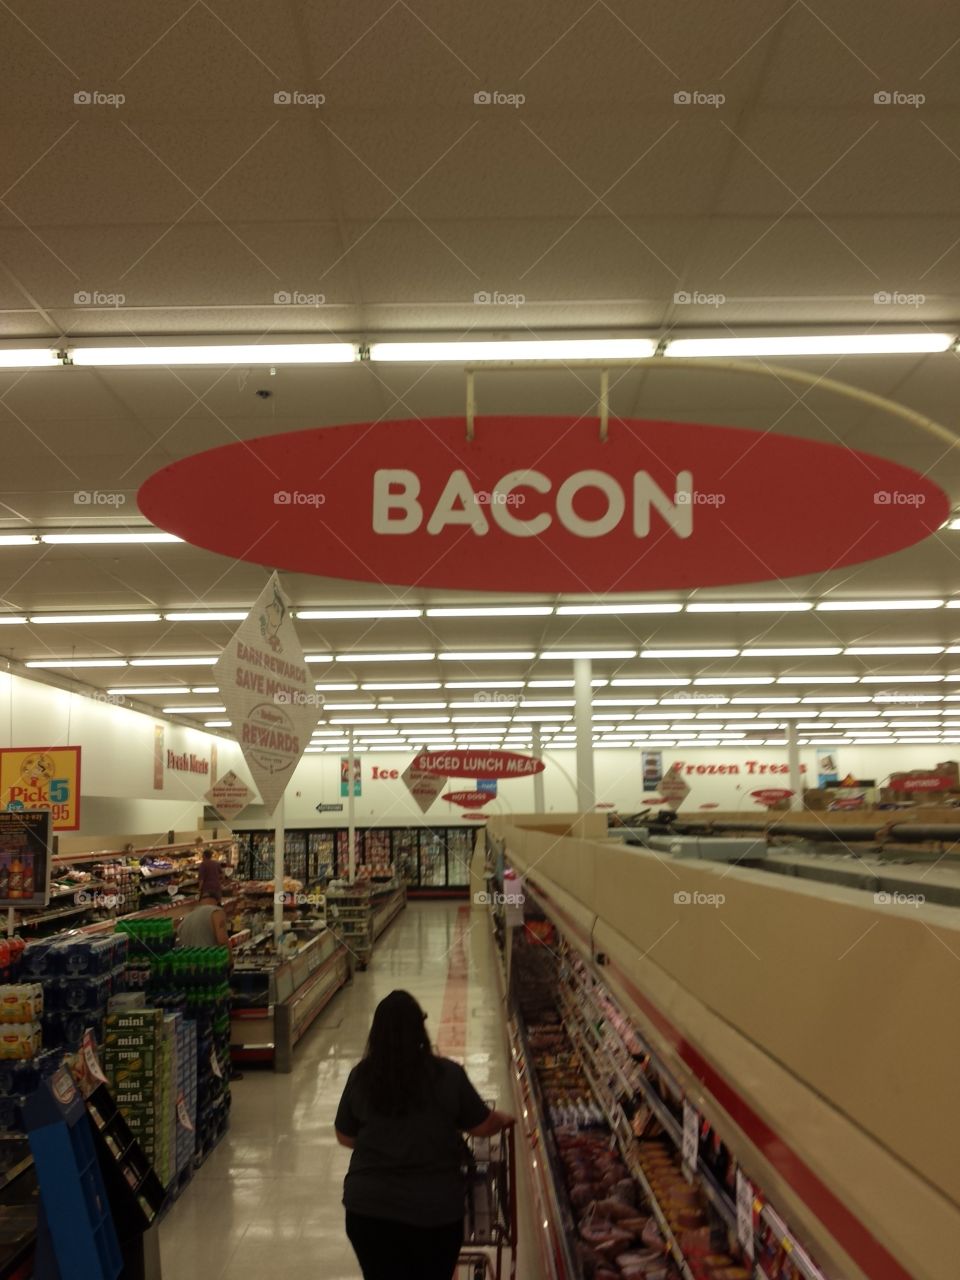 Bacon signage displayed prominently above bacon and bacon like products; not really much more to say about it really.